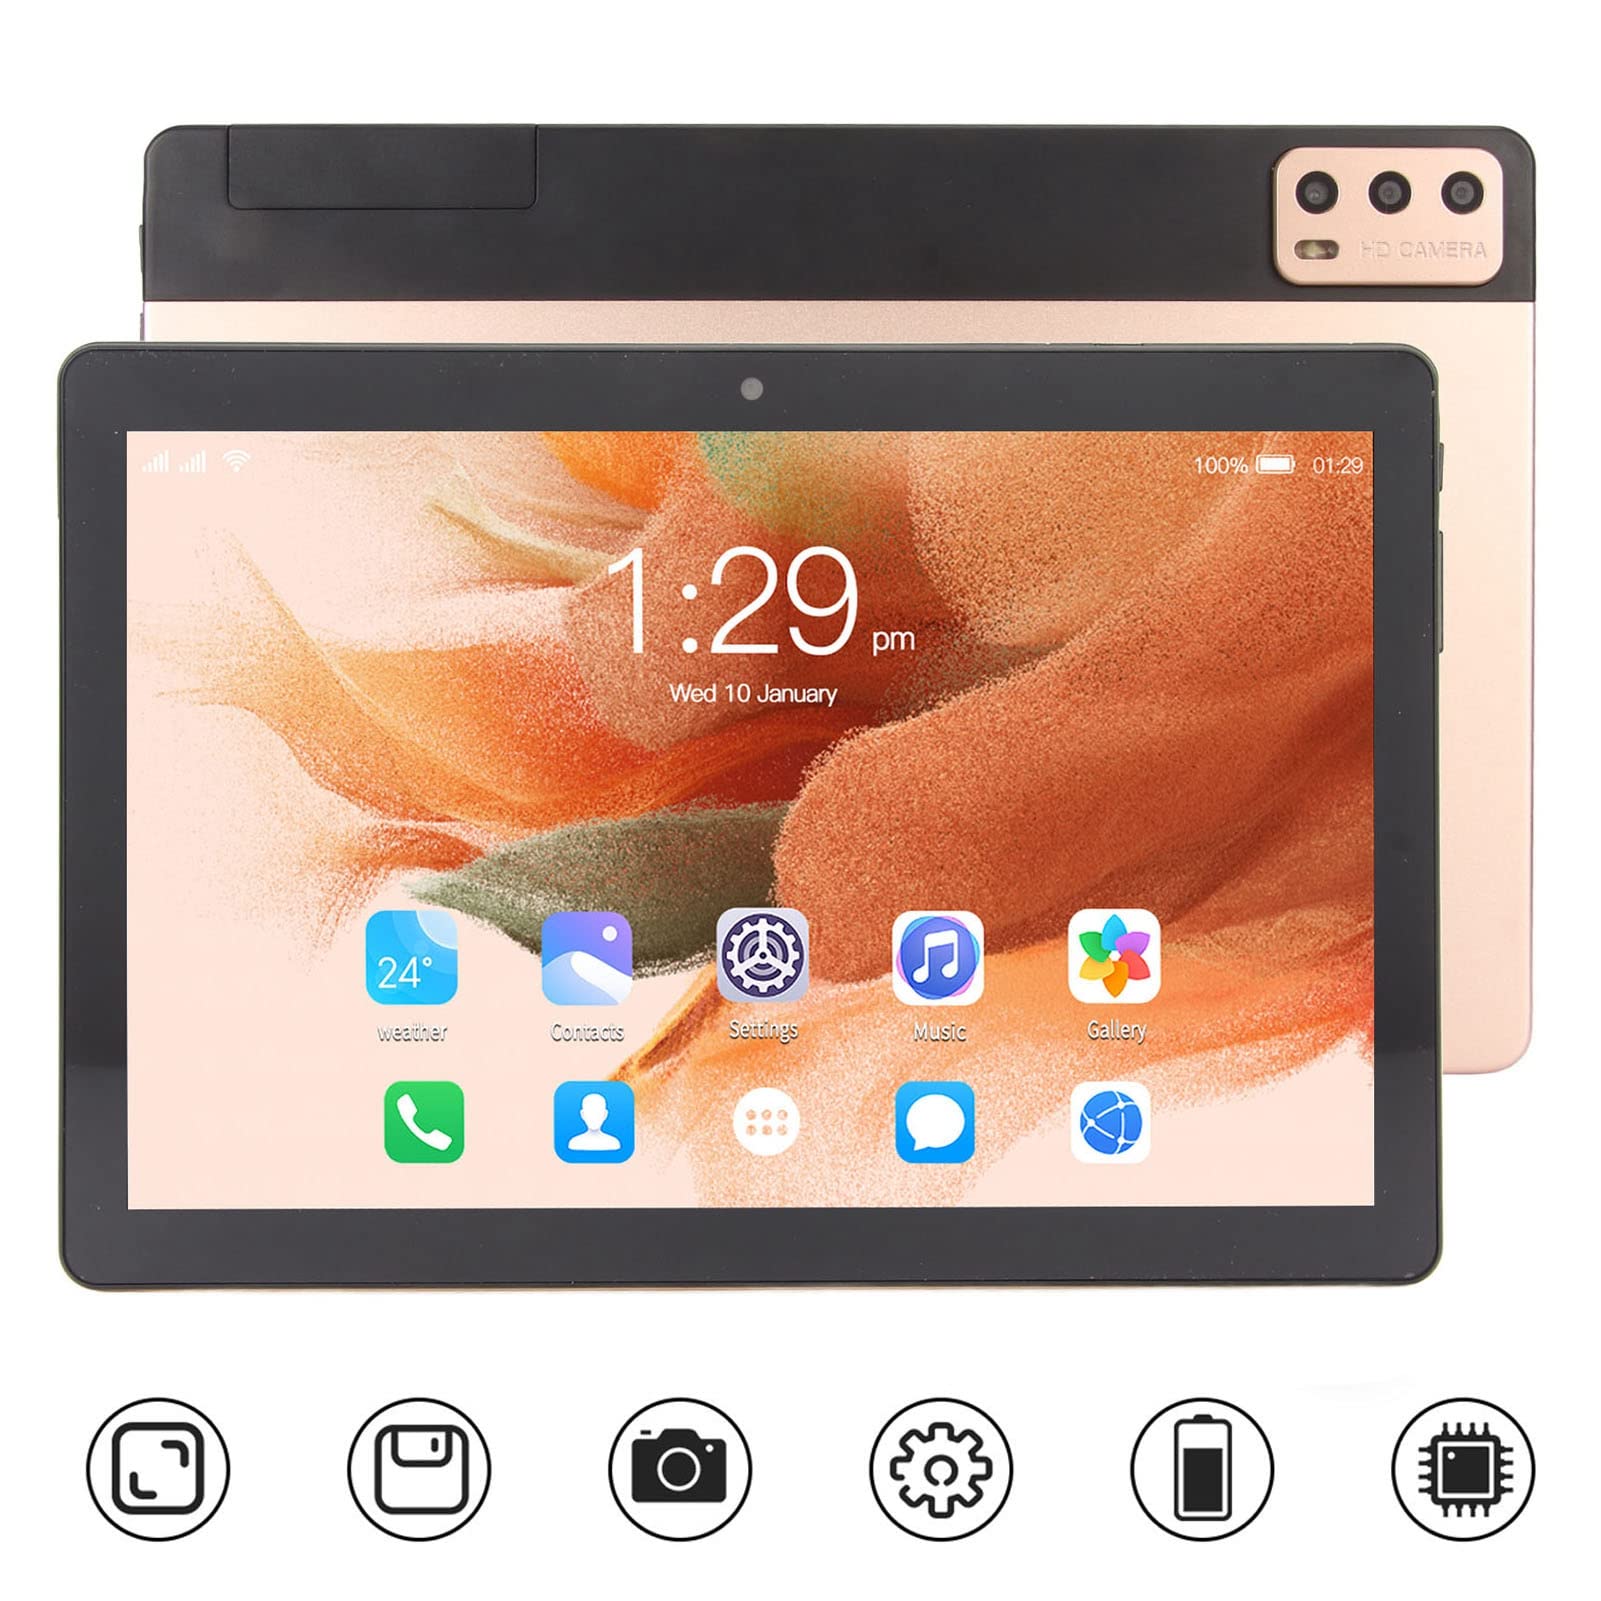 Acogedor 2 in 1 Tablet 10.1 Inch, Android 12.0 Tablets, Support 4G Band Calling Function, 2.4GHz and 5G WiFi Connection, 6GB RAM 128GB ROM, GPS, BT (Gold) (US Plug)